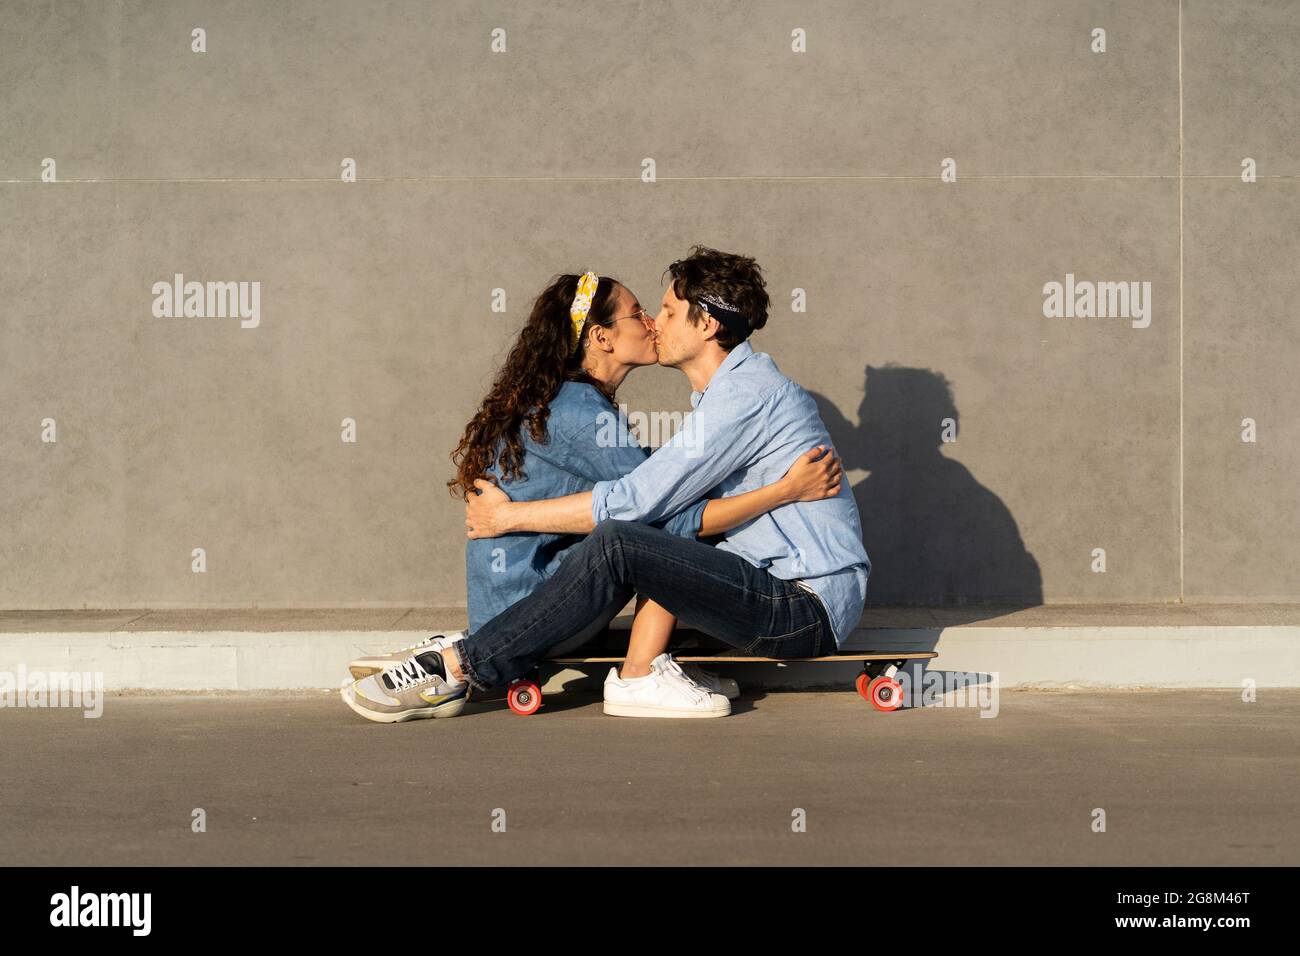 Loving young couple sitting on longboard kissing. Happy man and woman in love embracing outdoors Stock Photo